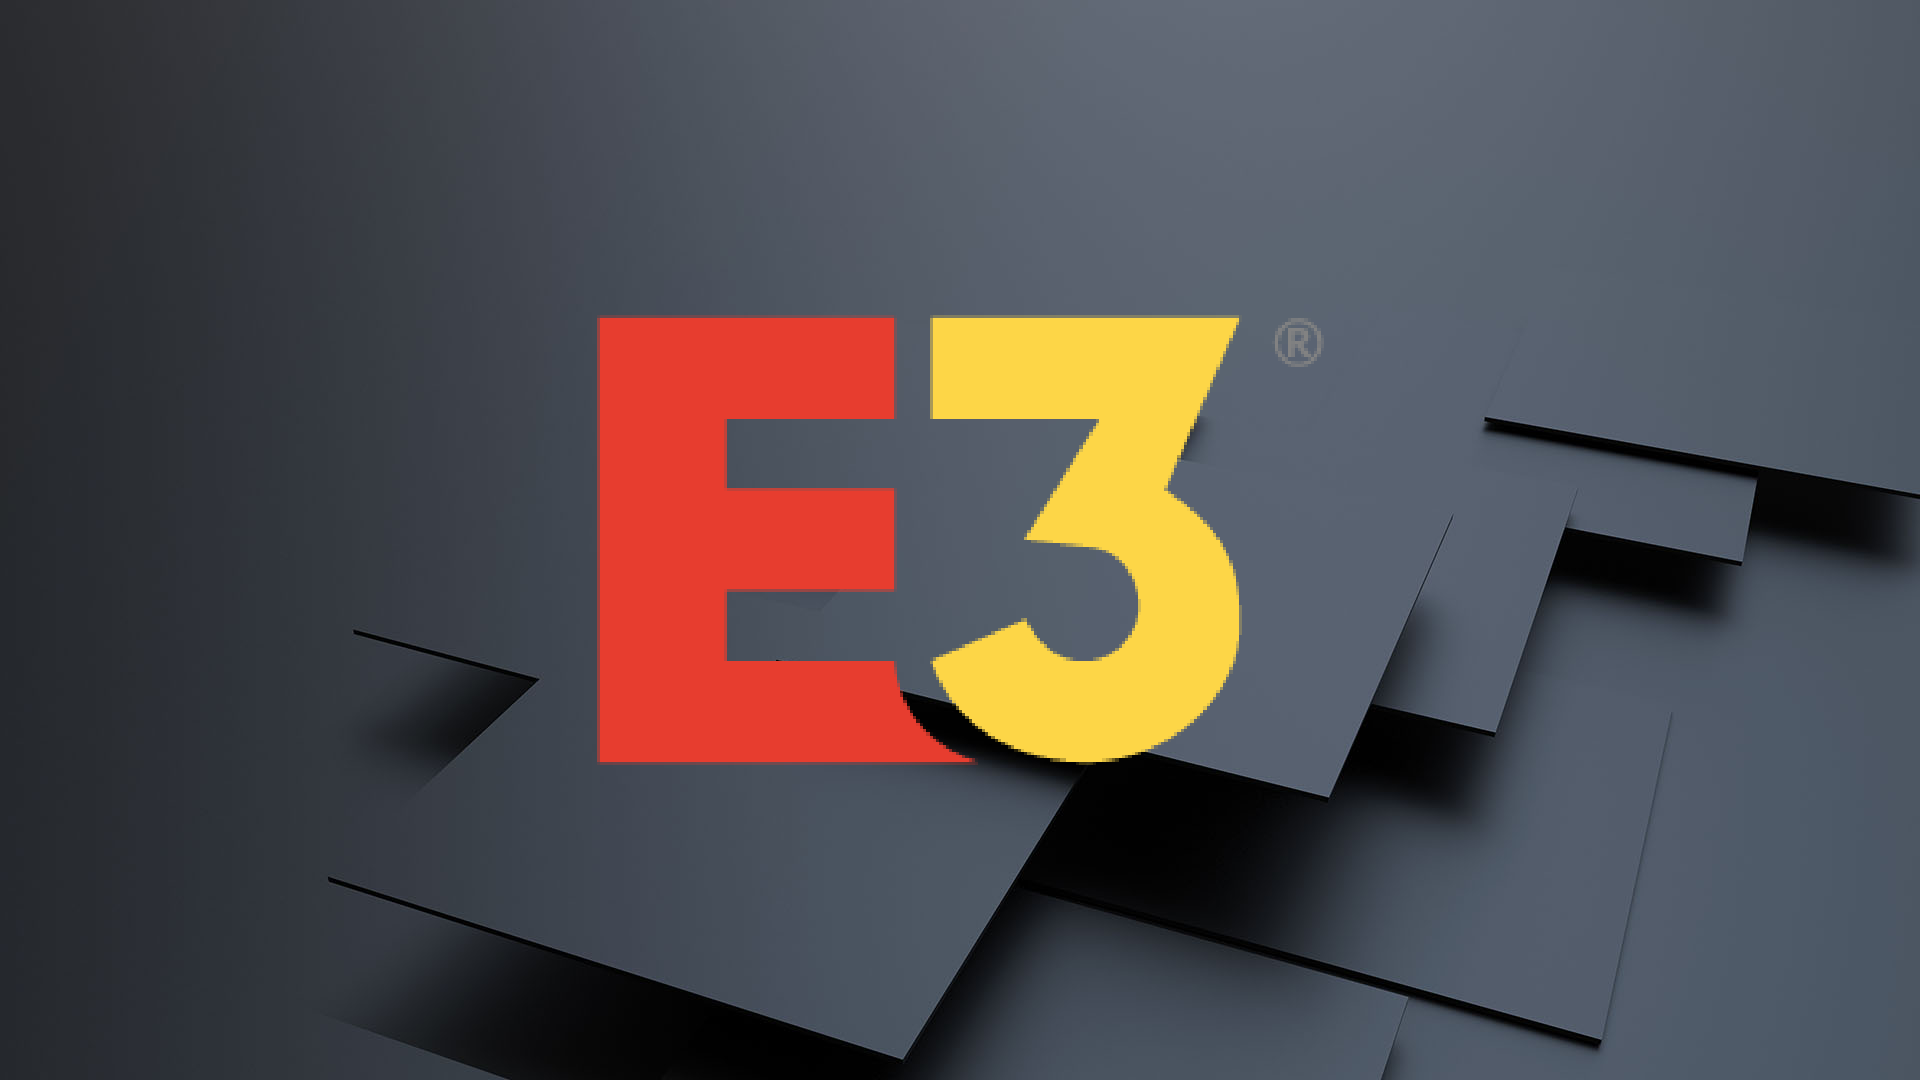 E3 2022 Is Canceled Completely